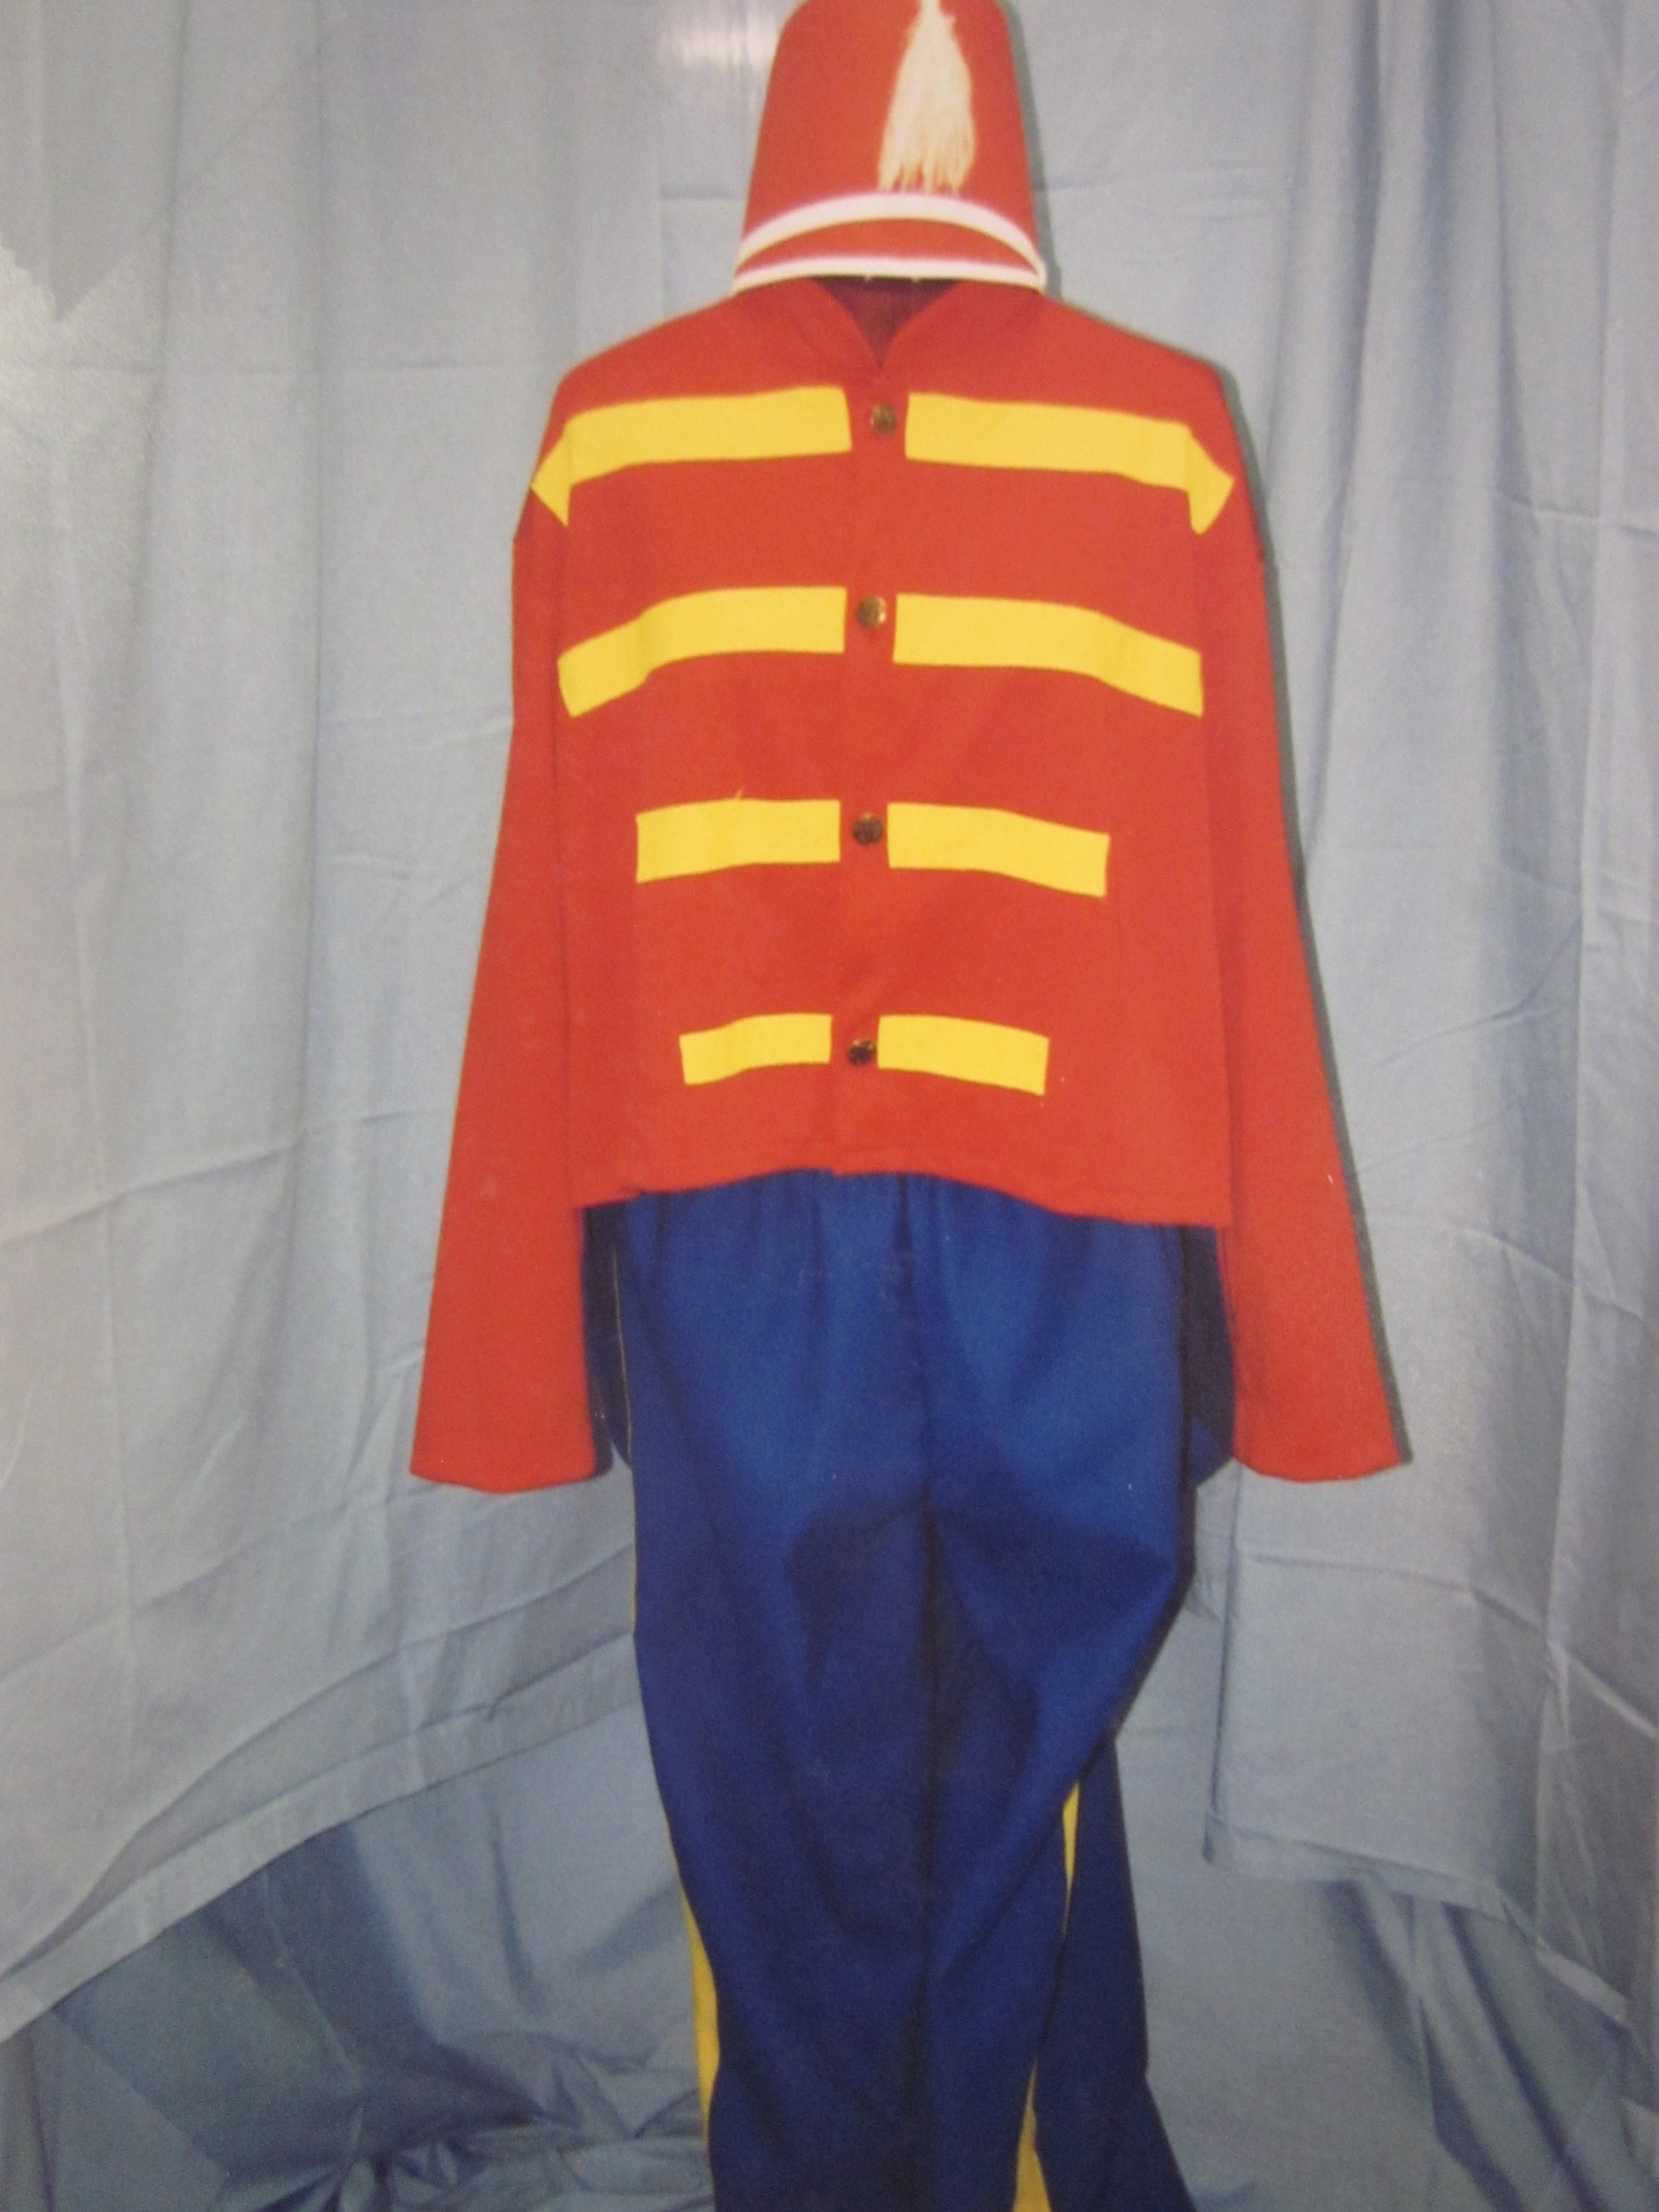 TOY SOLDIER COSTUME #92 & #93 - MISS LESTER'S 